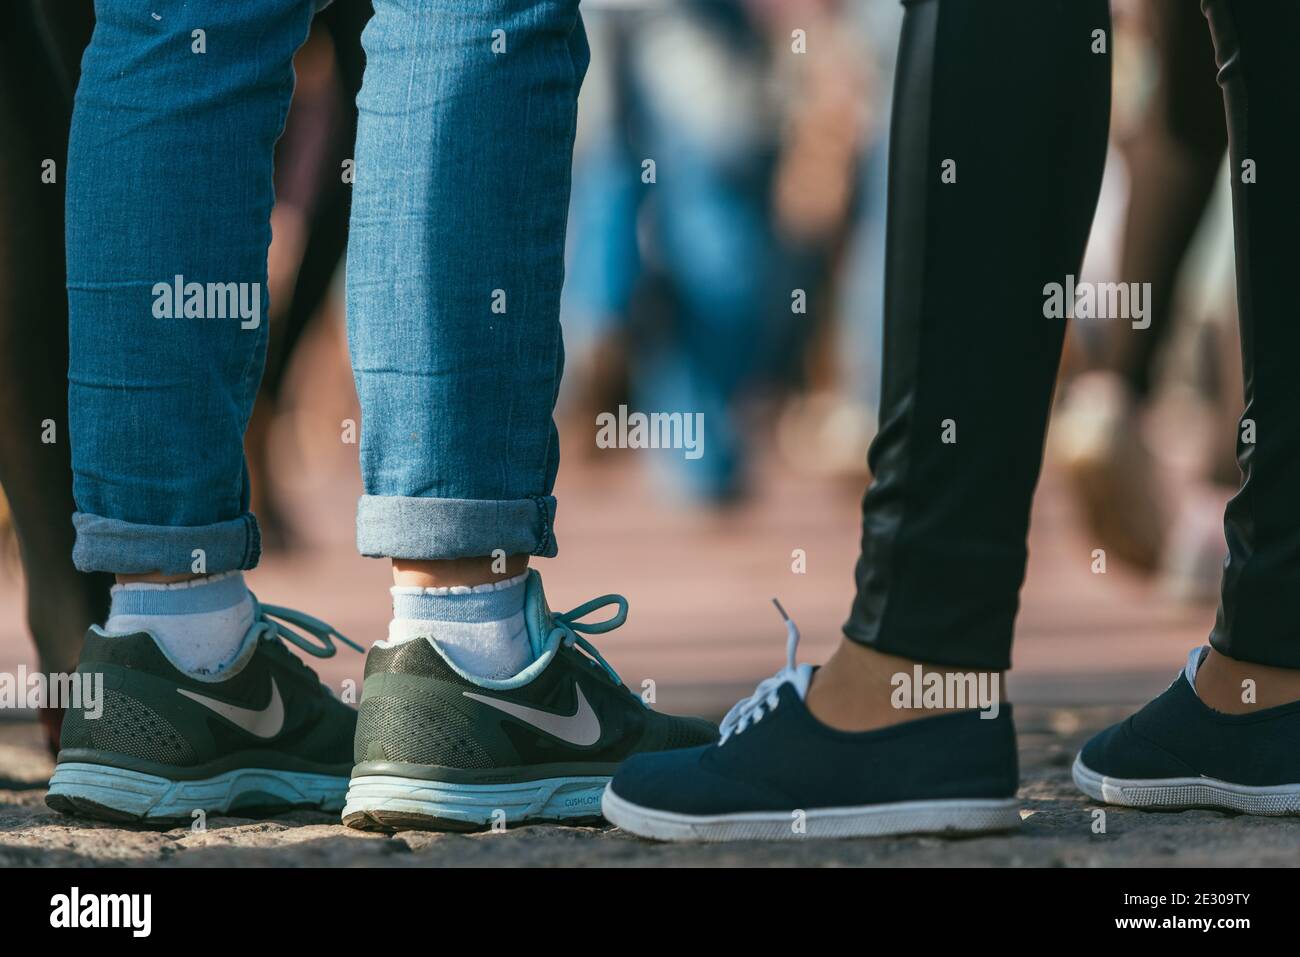 MOSCOW, RUSSIA-MAY 09, 2015: people are dancing outdoors in the Park on Pushkinskaya embankment at sunny day. nike sneakers on women's feet in the Stock Photo